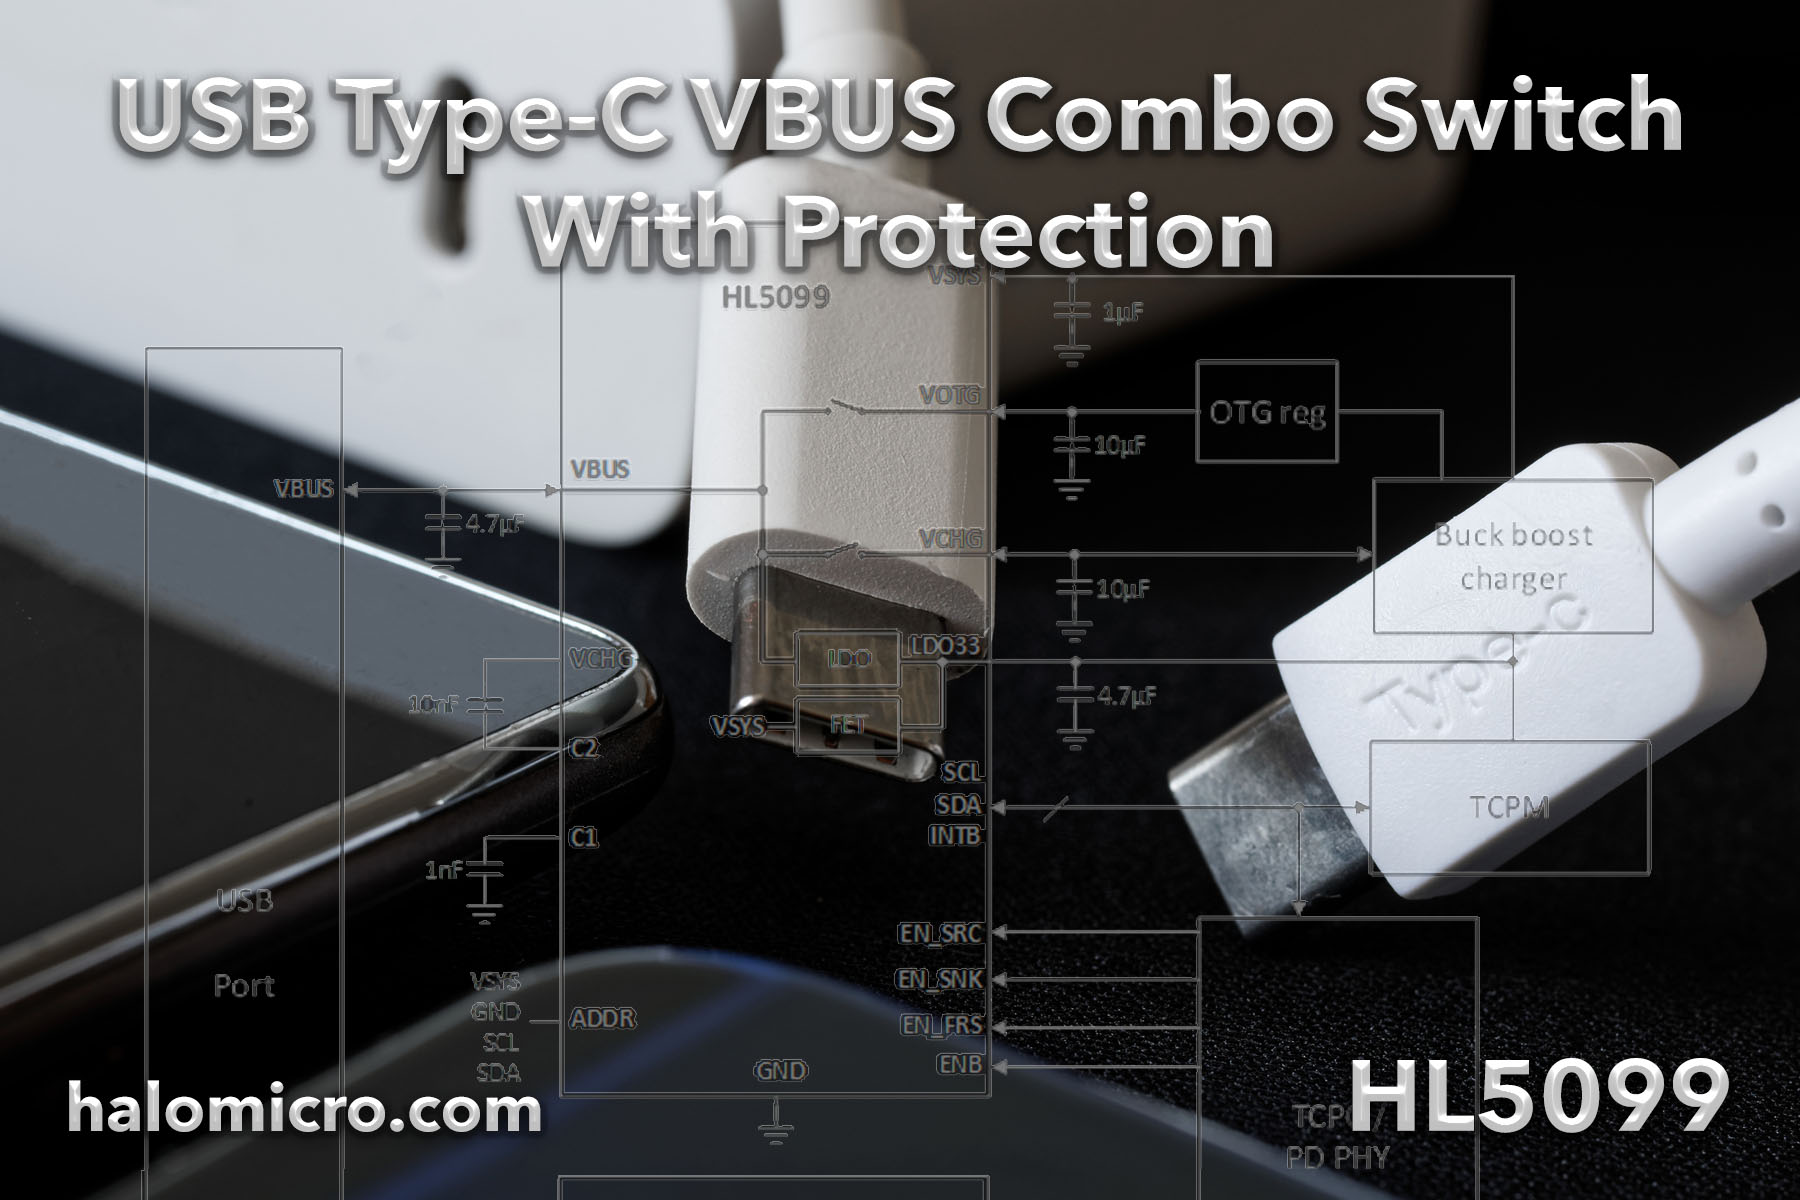 Halo Microelectronics Introduces a USB Type-C VBUS Combo Switch with Protection